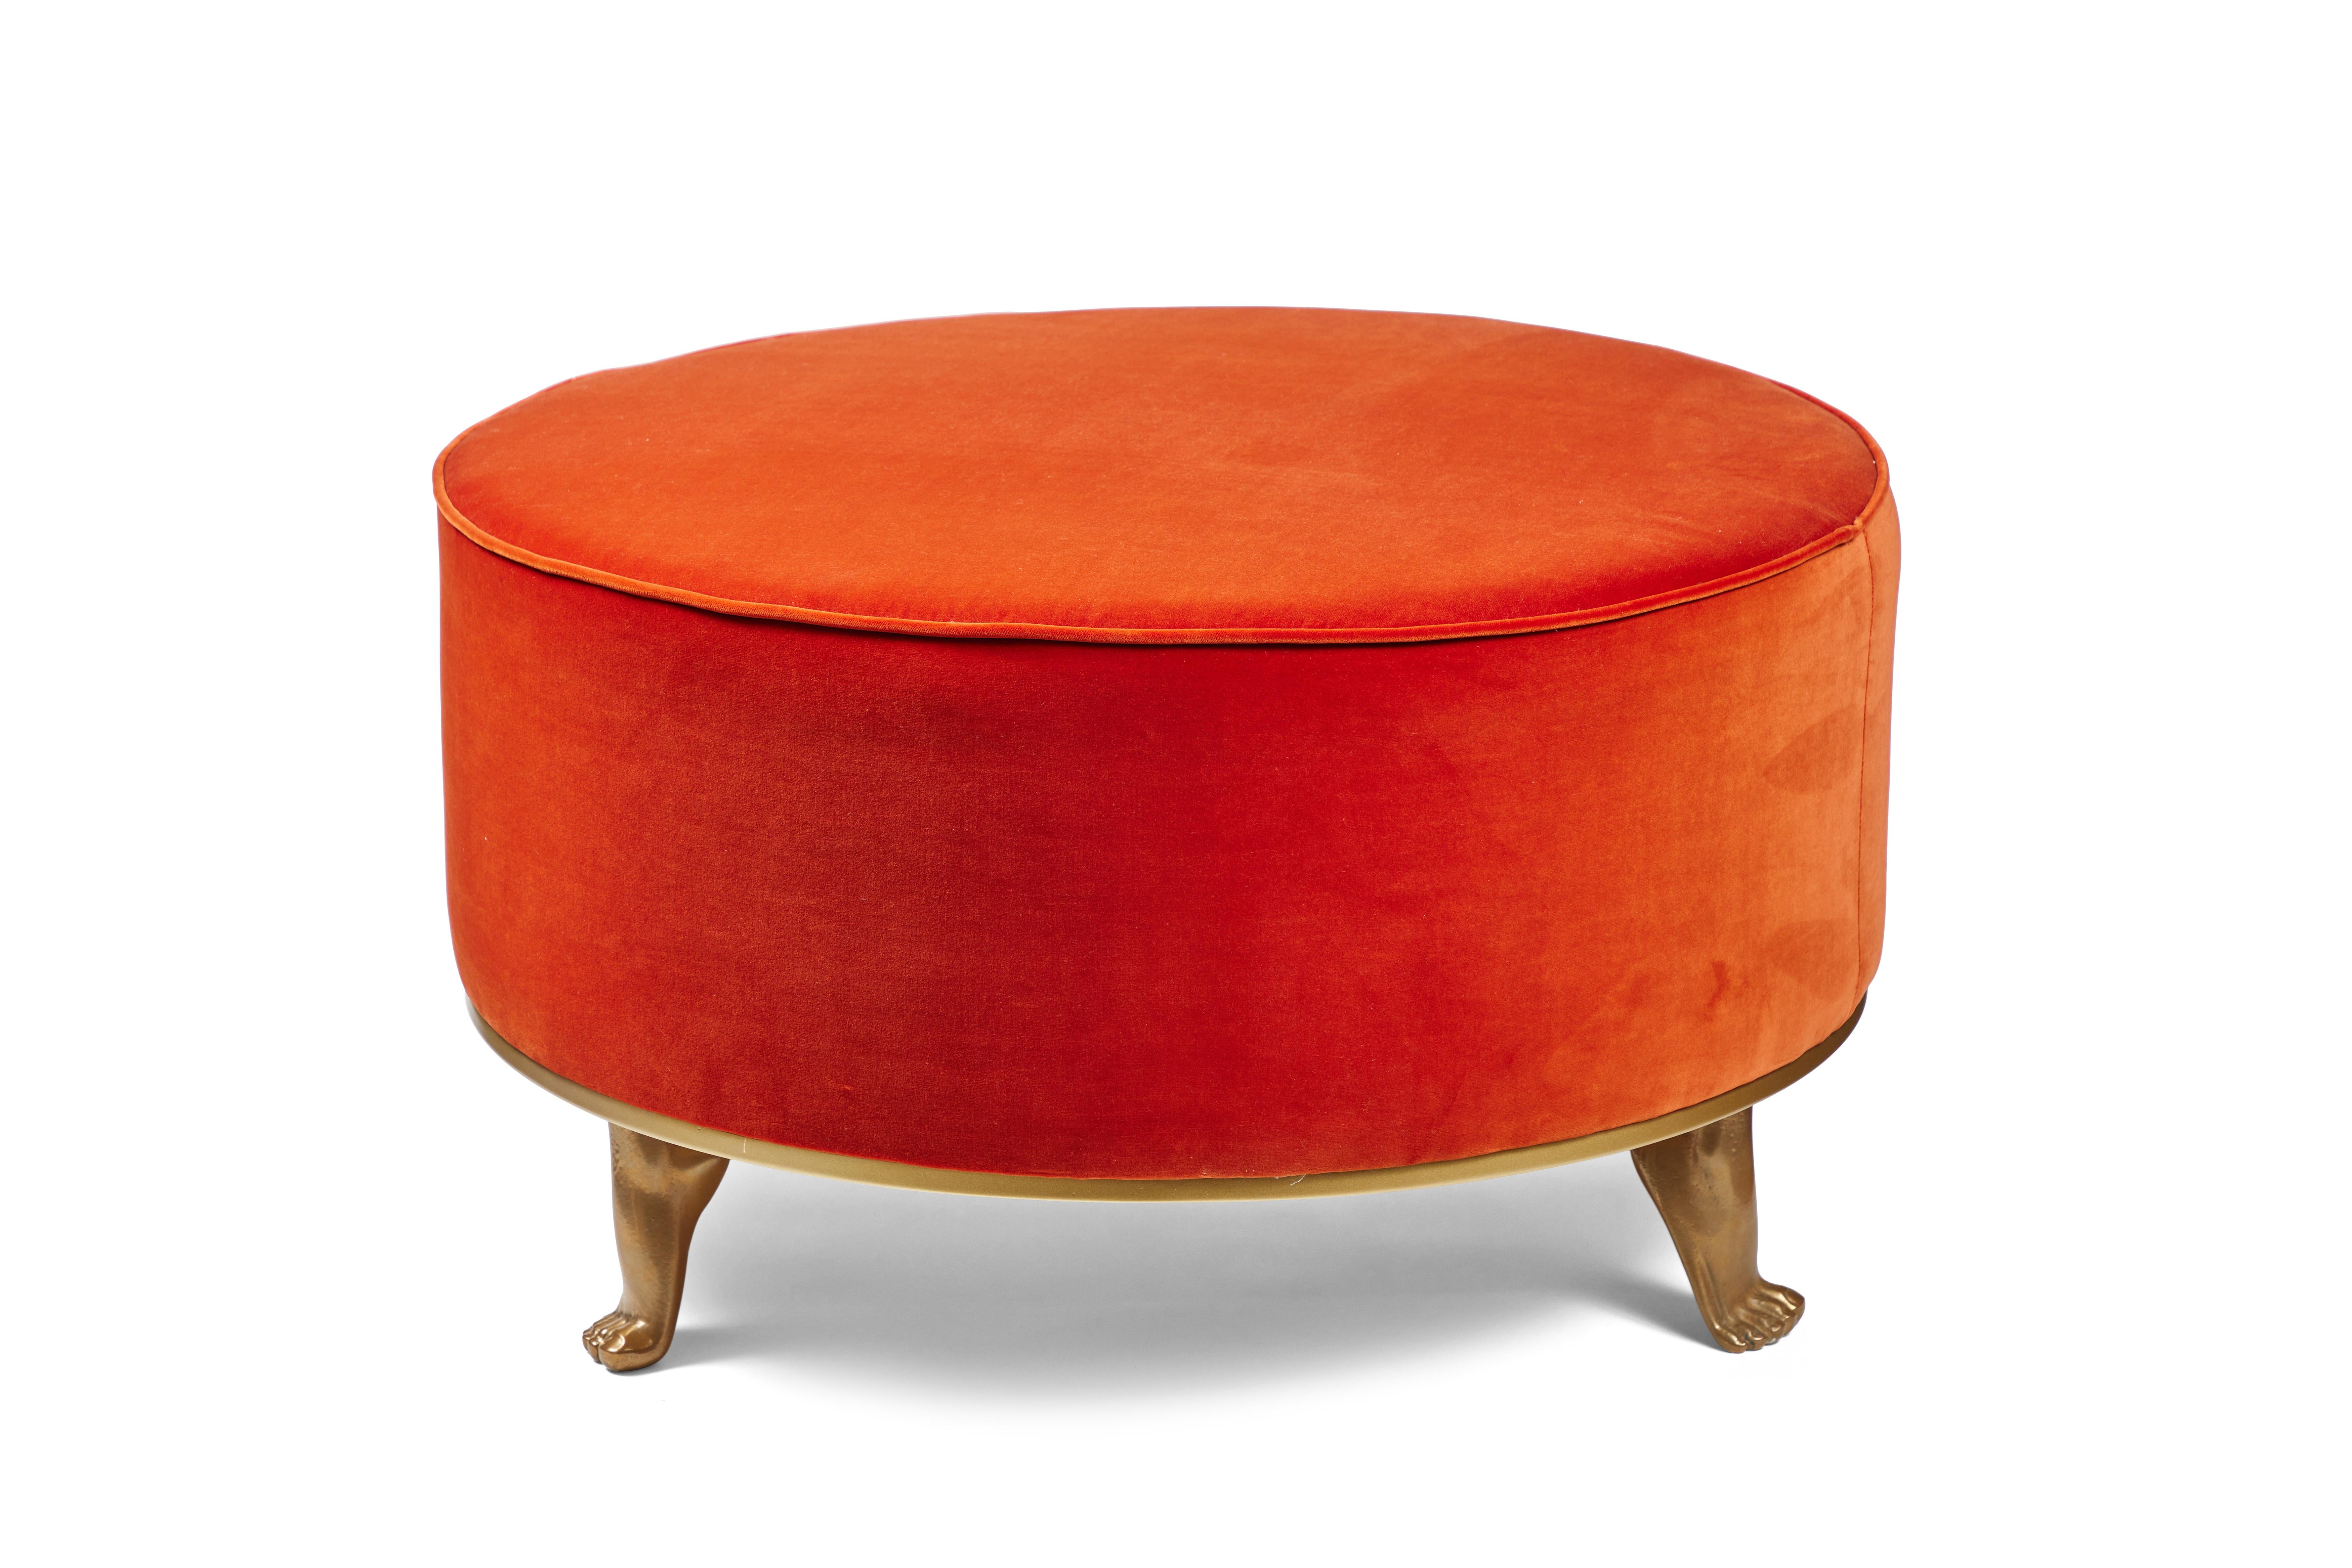 Playful and chic ottoman from the Modern Envy line by On Madison. Cast resin feet finished in your choice of metallic gold or silver elevate a round ottoman which can be finished in your choice of fabric. 6-8 weeks production time.